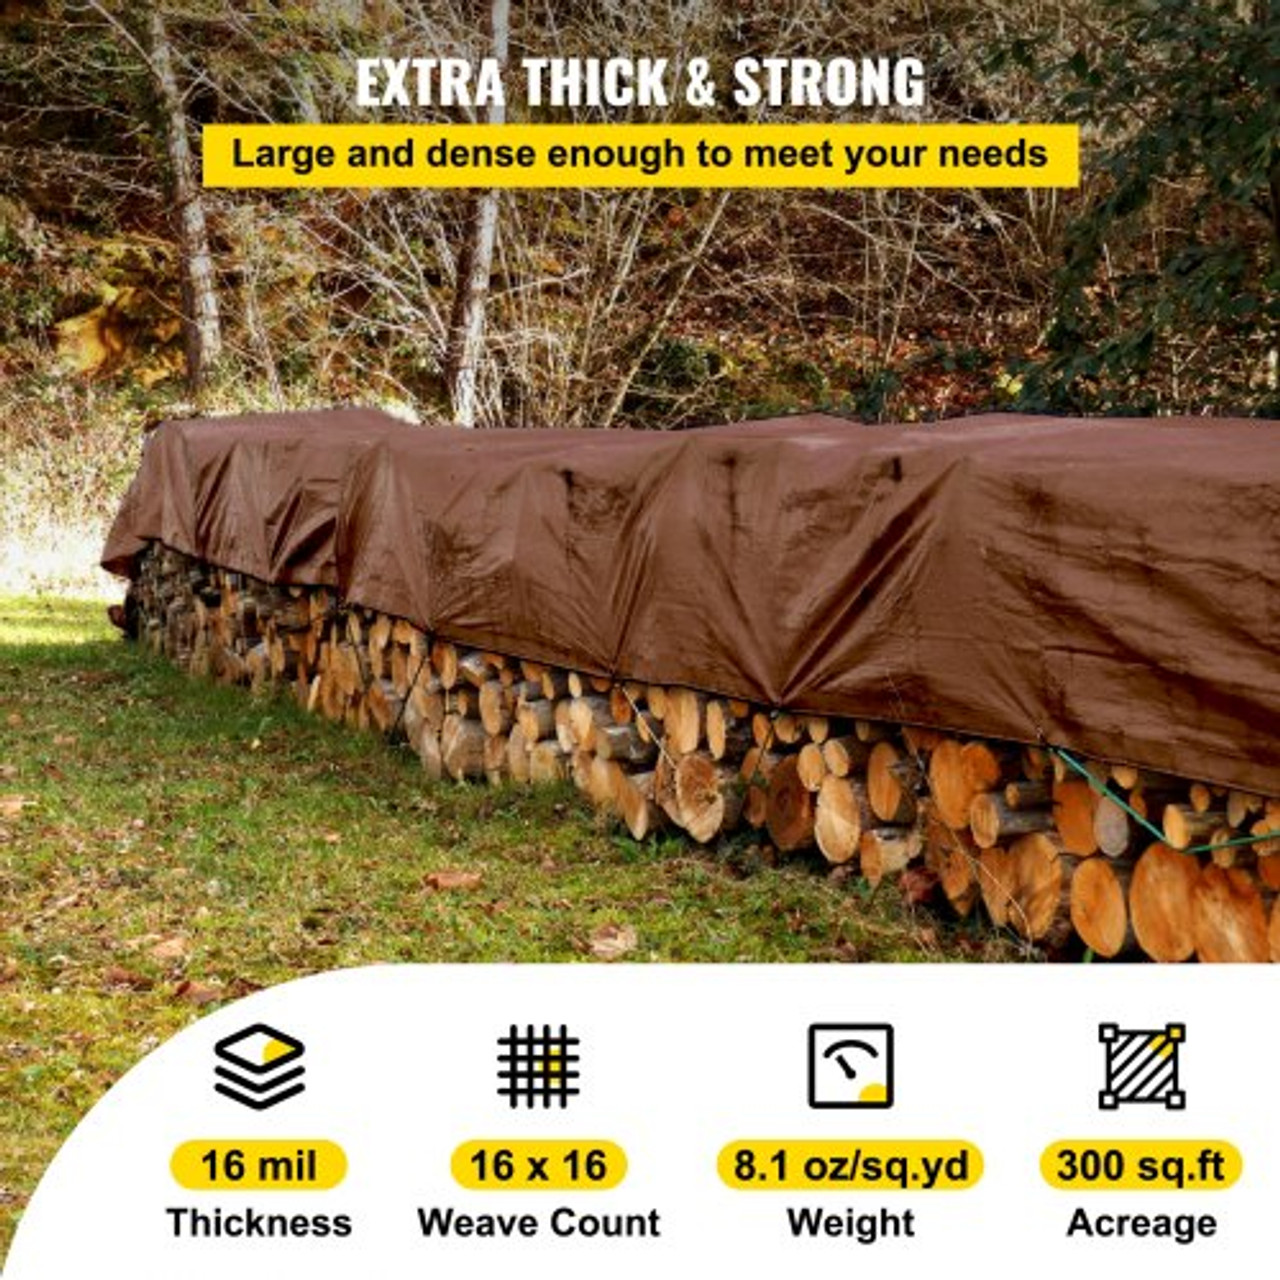 Heavy Duty Tarp, 12 x 25 ft 16 Mil Thick, Waterproof & Sunproof Outdoor Cover, Rip and Tear Proof PE Tarpaulin with Grommets and Reinforced Edges for Truck, RV, Boat, Roof, Tent, Camping, Brown